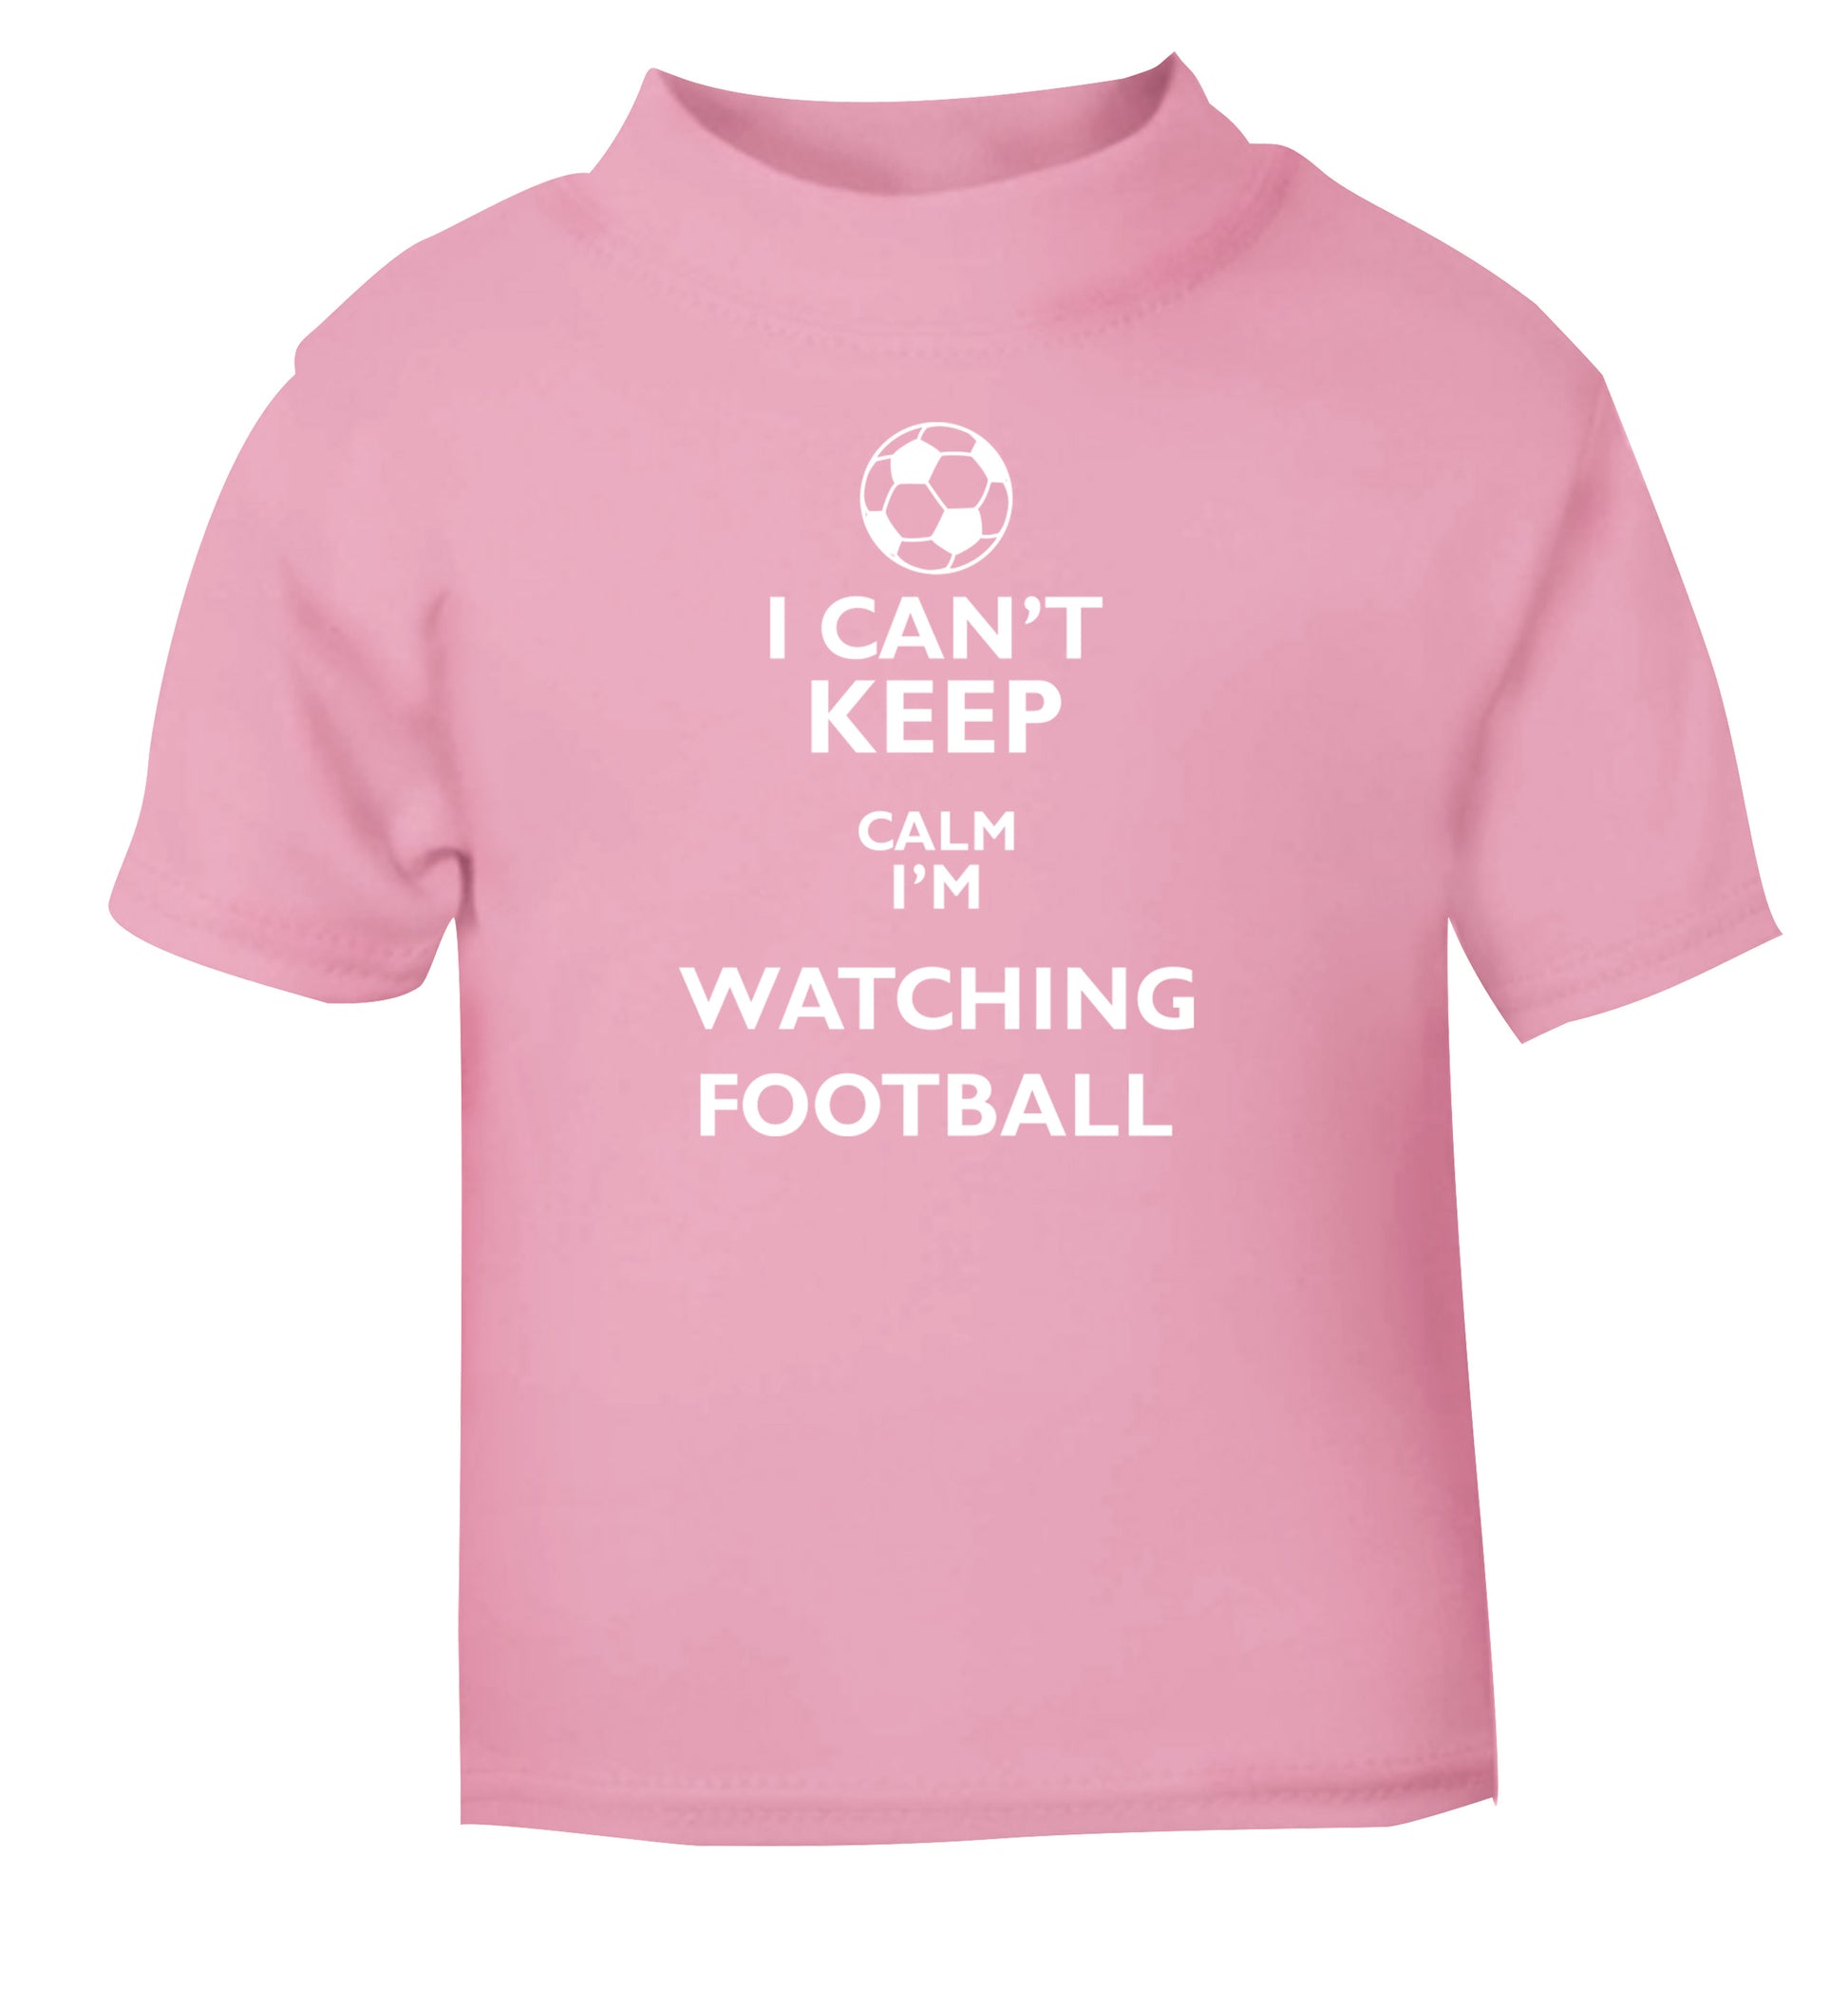 I can't keep calm I'm watching the football light pink Baby Toddler Tshirt 2 Years